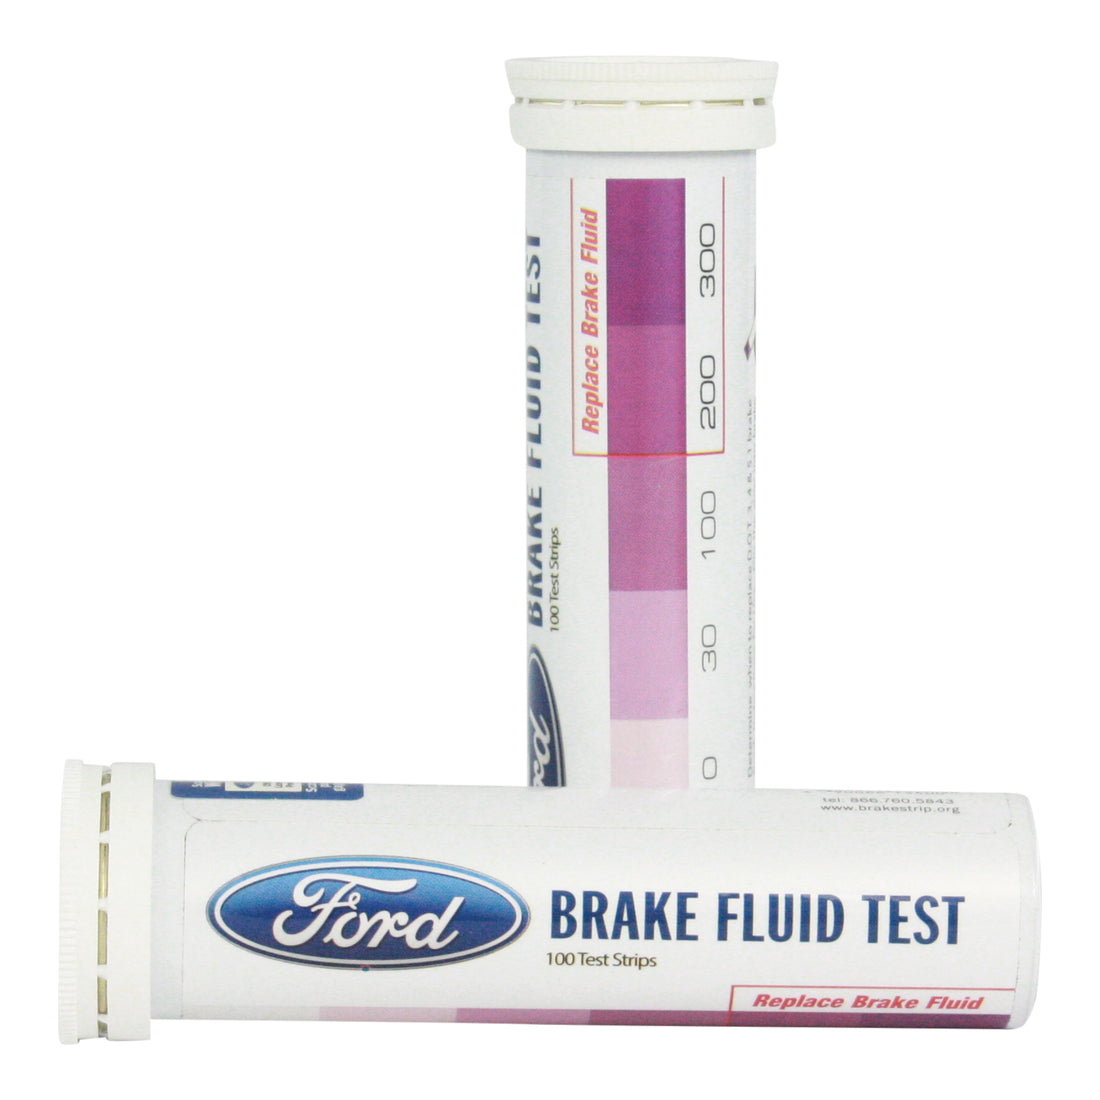 Phoenix System Announces Agreement to License and Market Ford-Branded Brake Fluid Test Strips